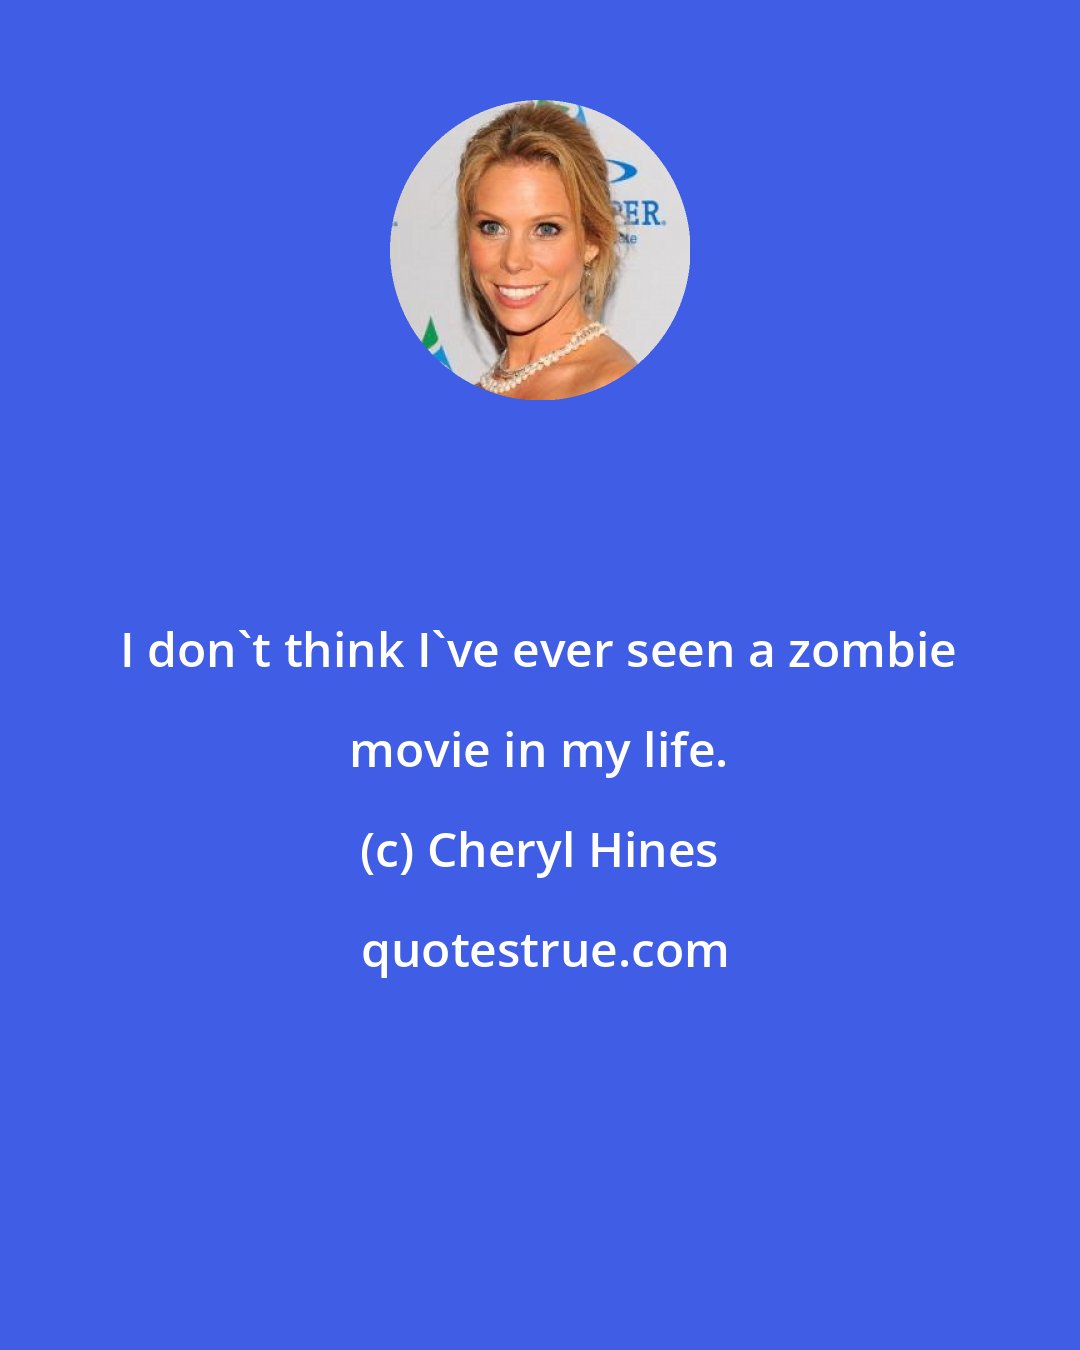 Cheryl Hines: I don't think I've ever seen a zombie movie in my life.